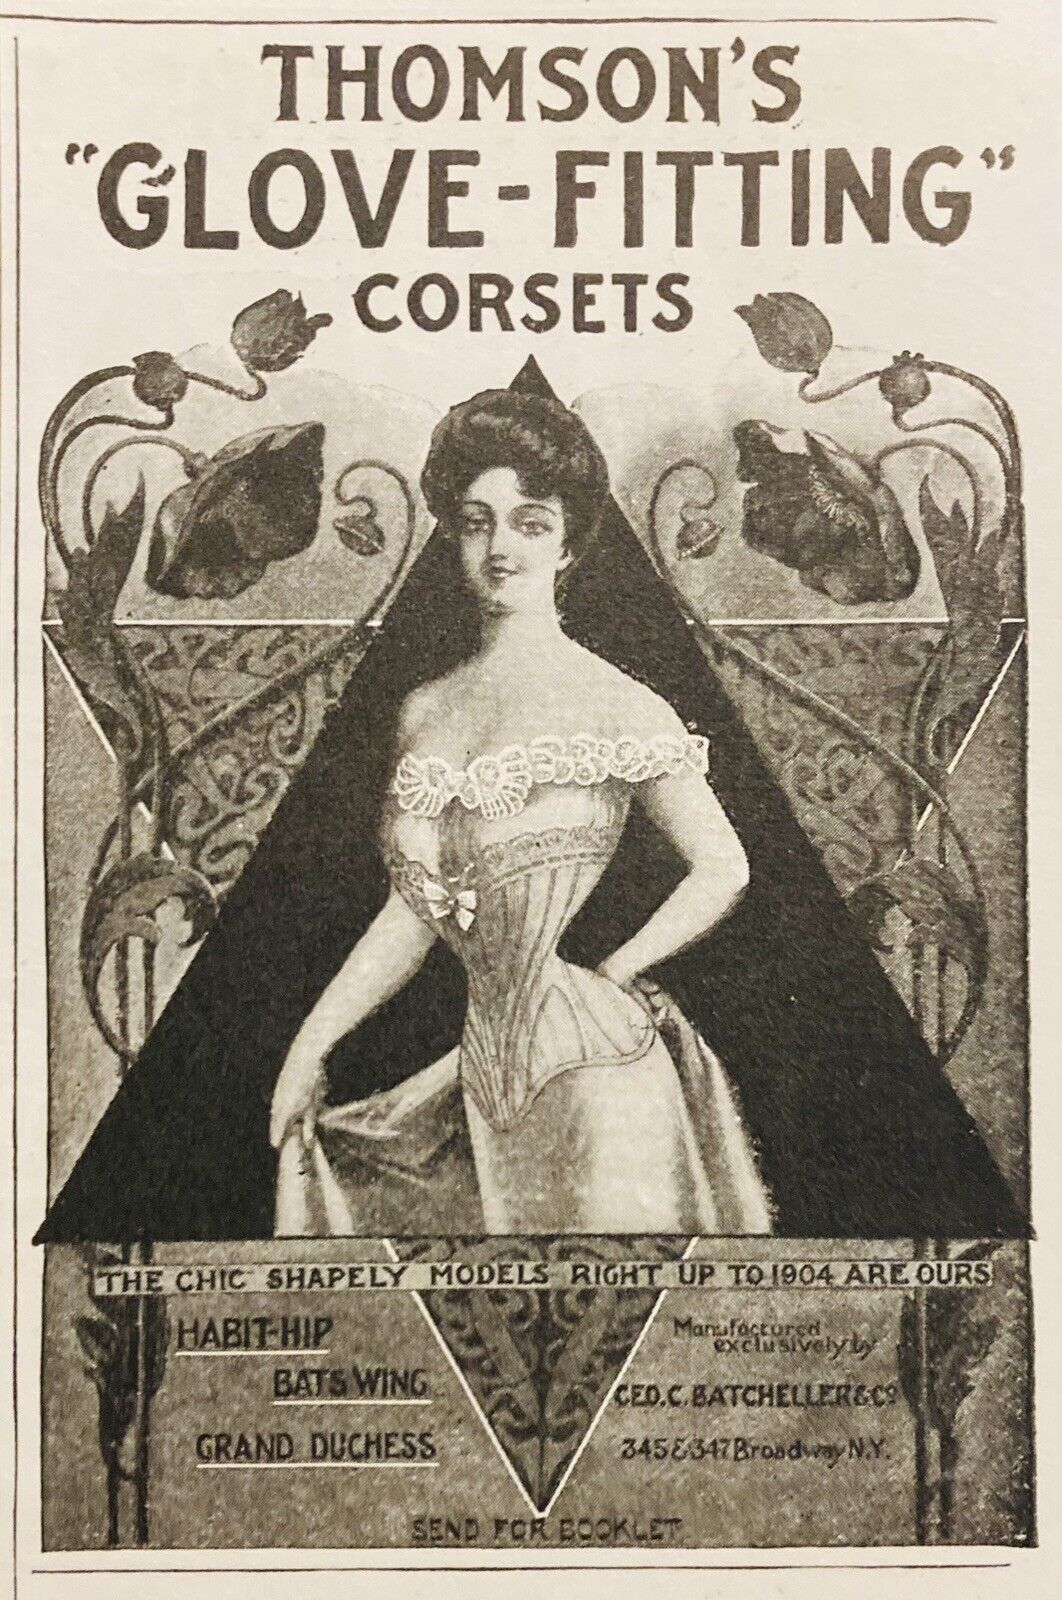 1904 AD(N18)~THOMSON’S “GLOVE-FITTING” CORSETS, BROADWAY, NY.